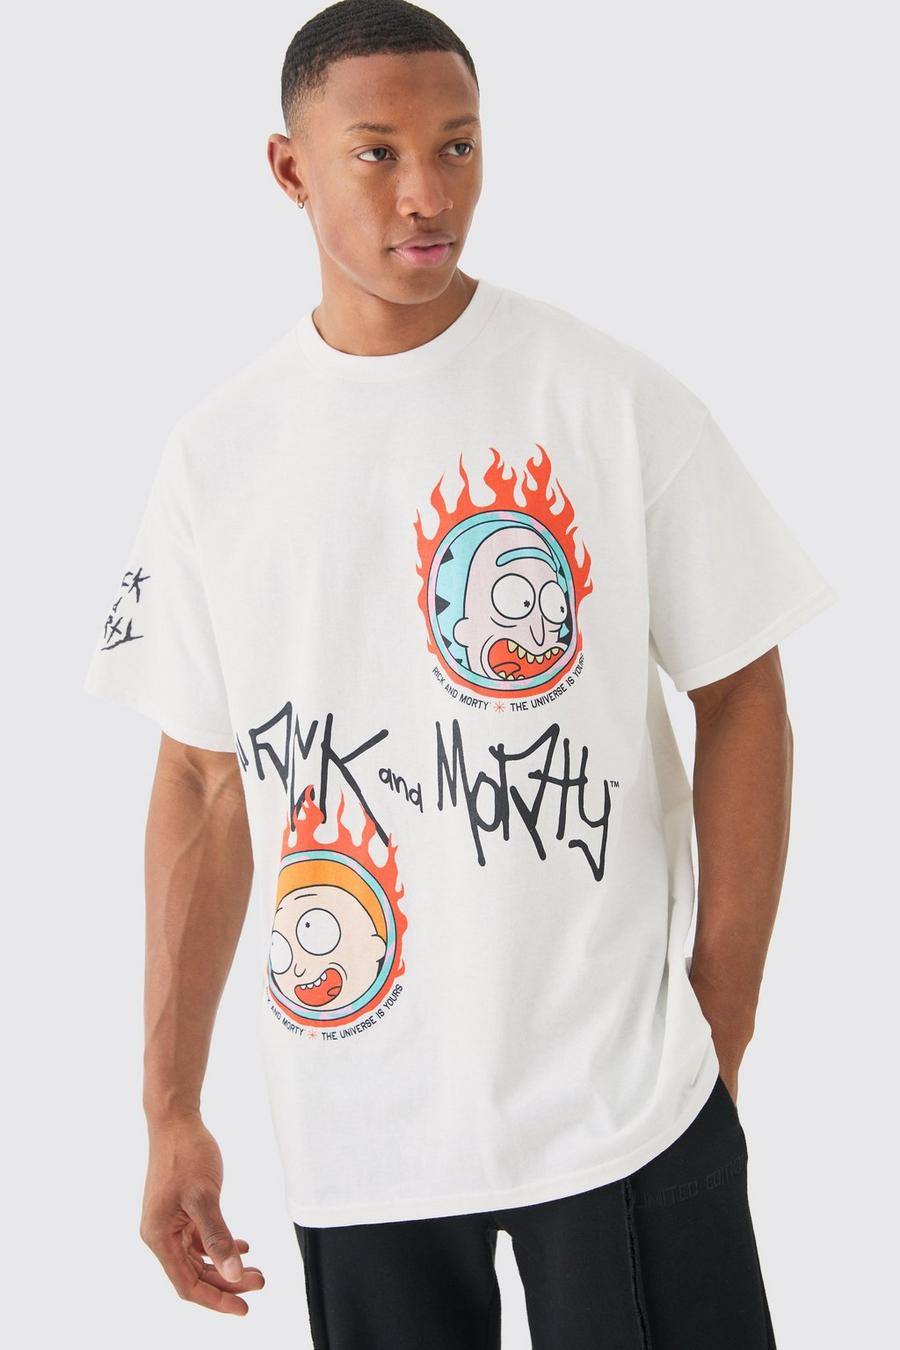 White Oversized Rick And Morty Cartoon License T-shirt